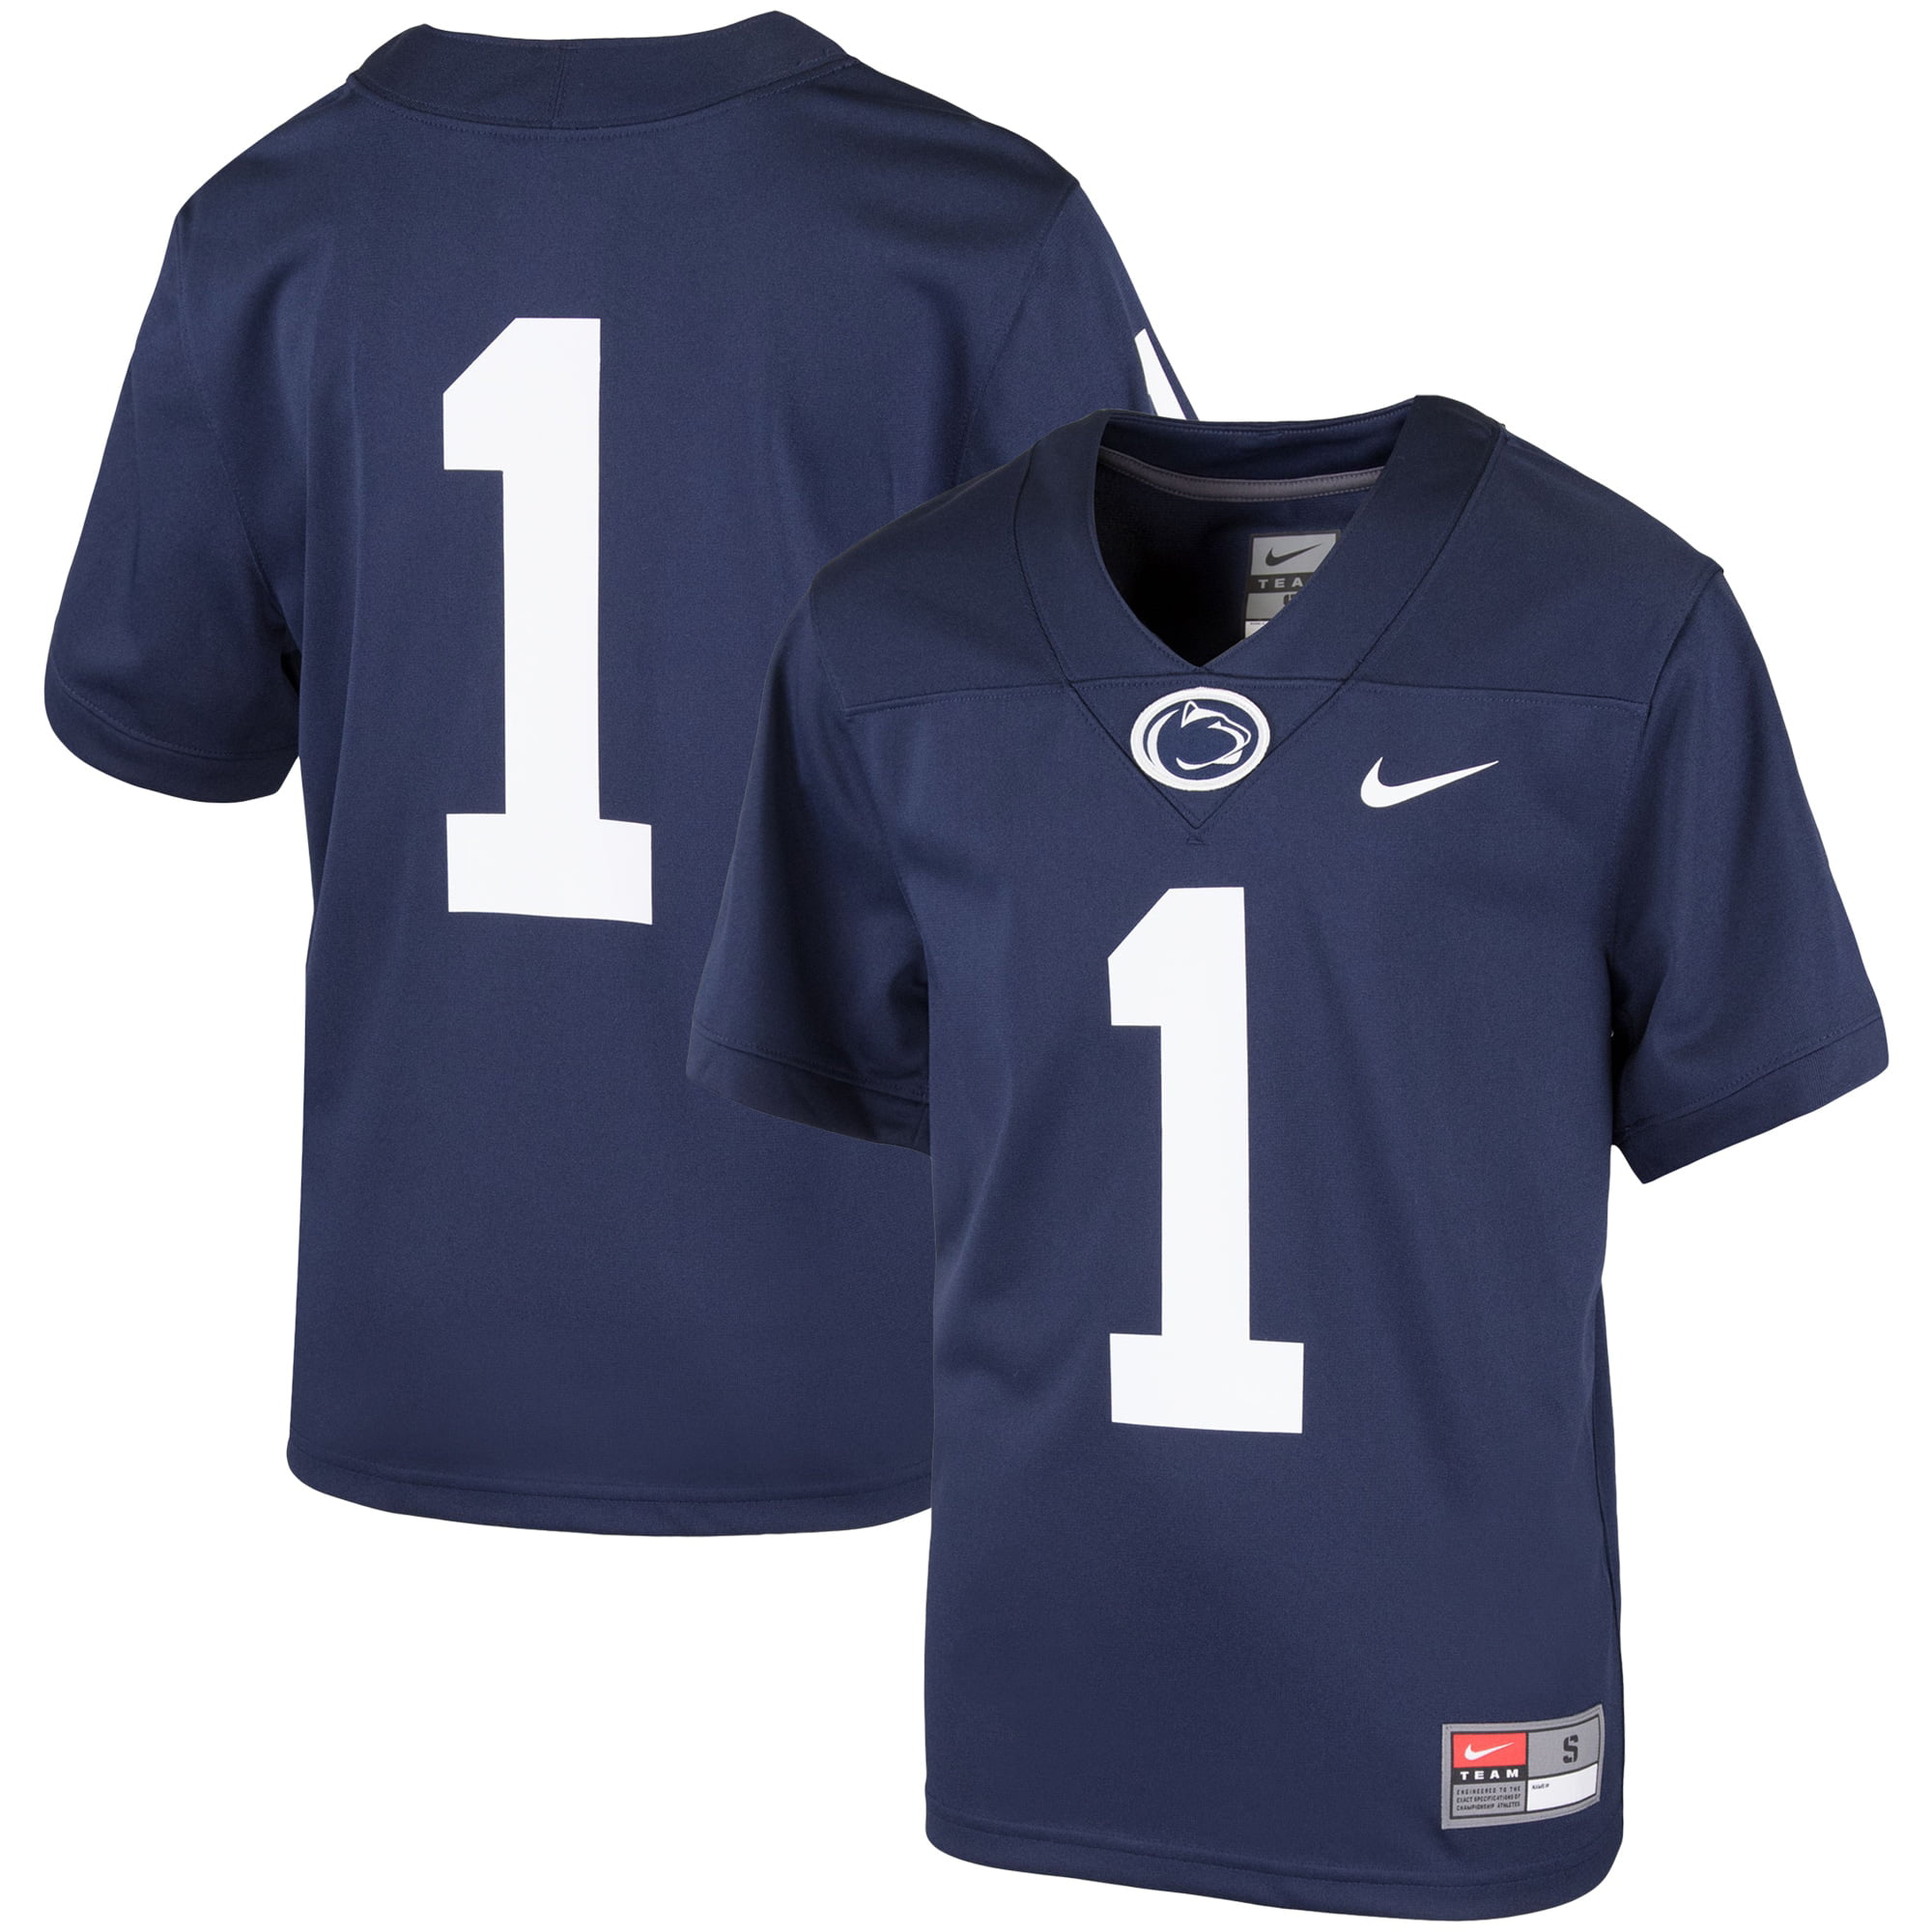 1 Penn State Nittany Lions Nike Youth 